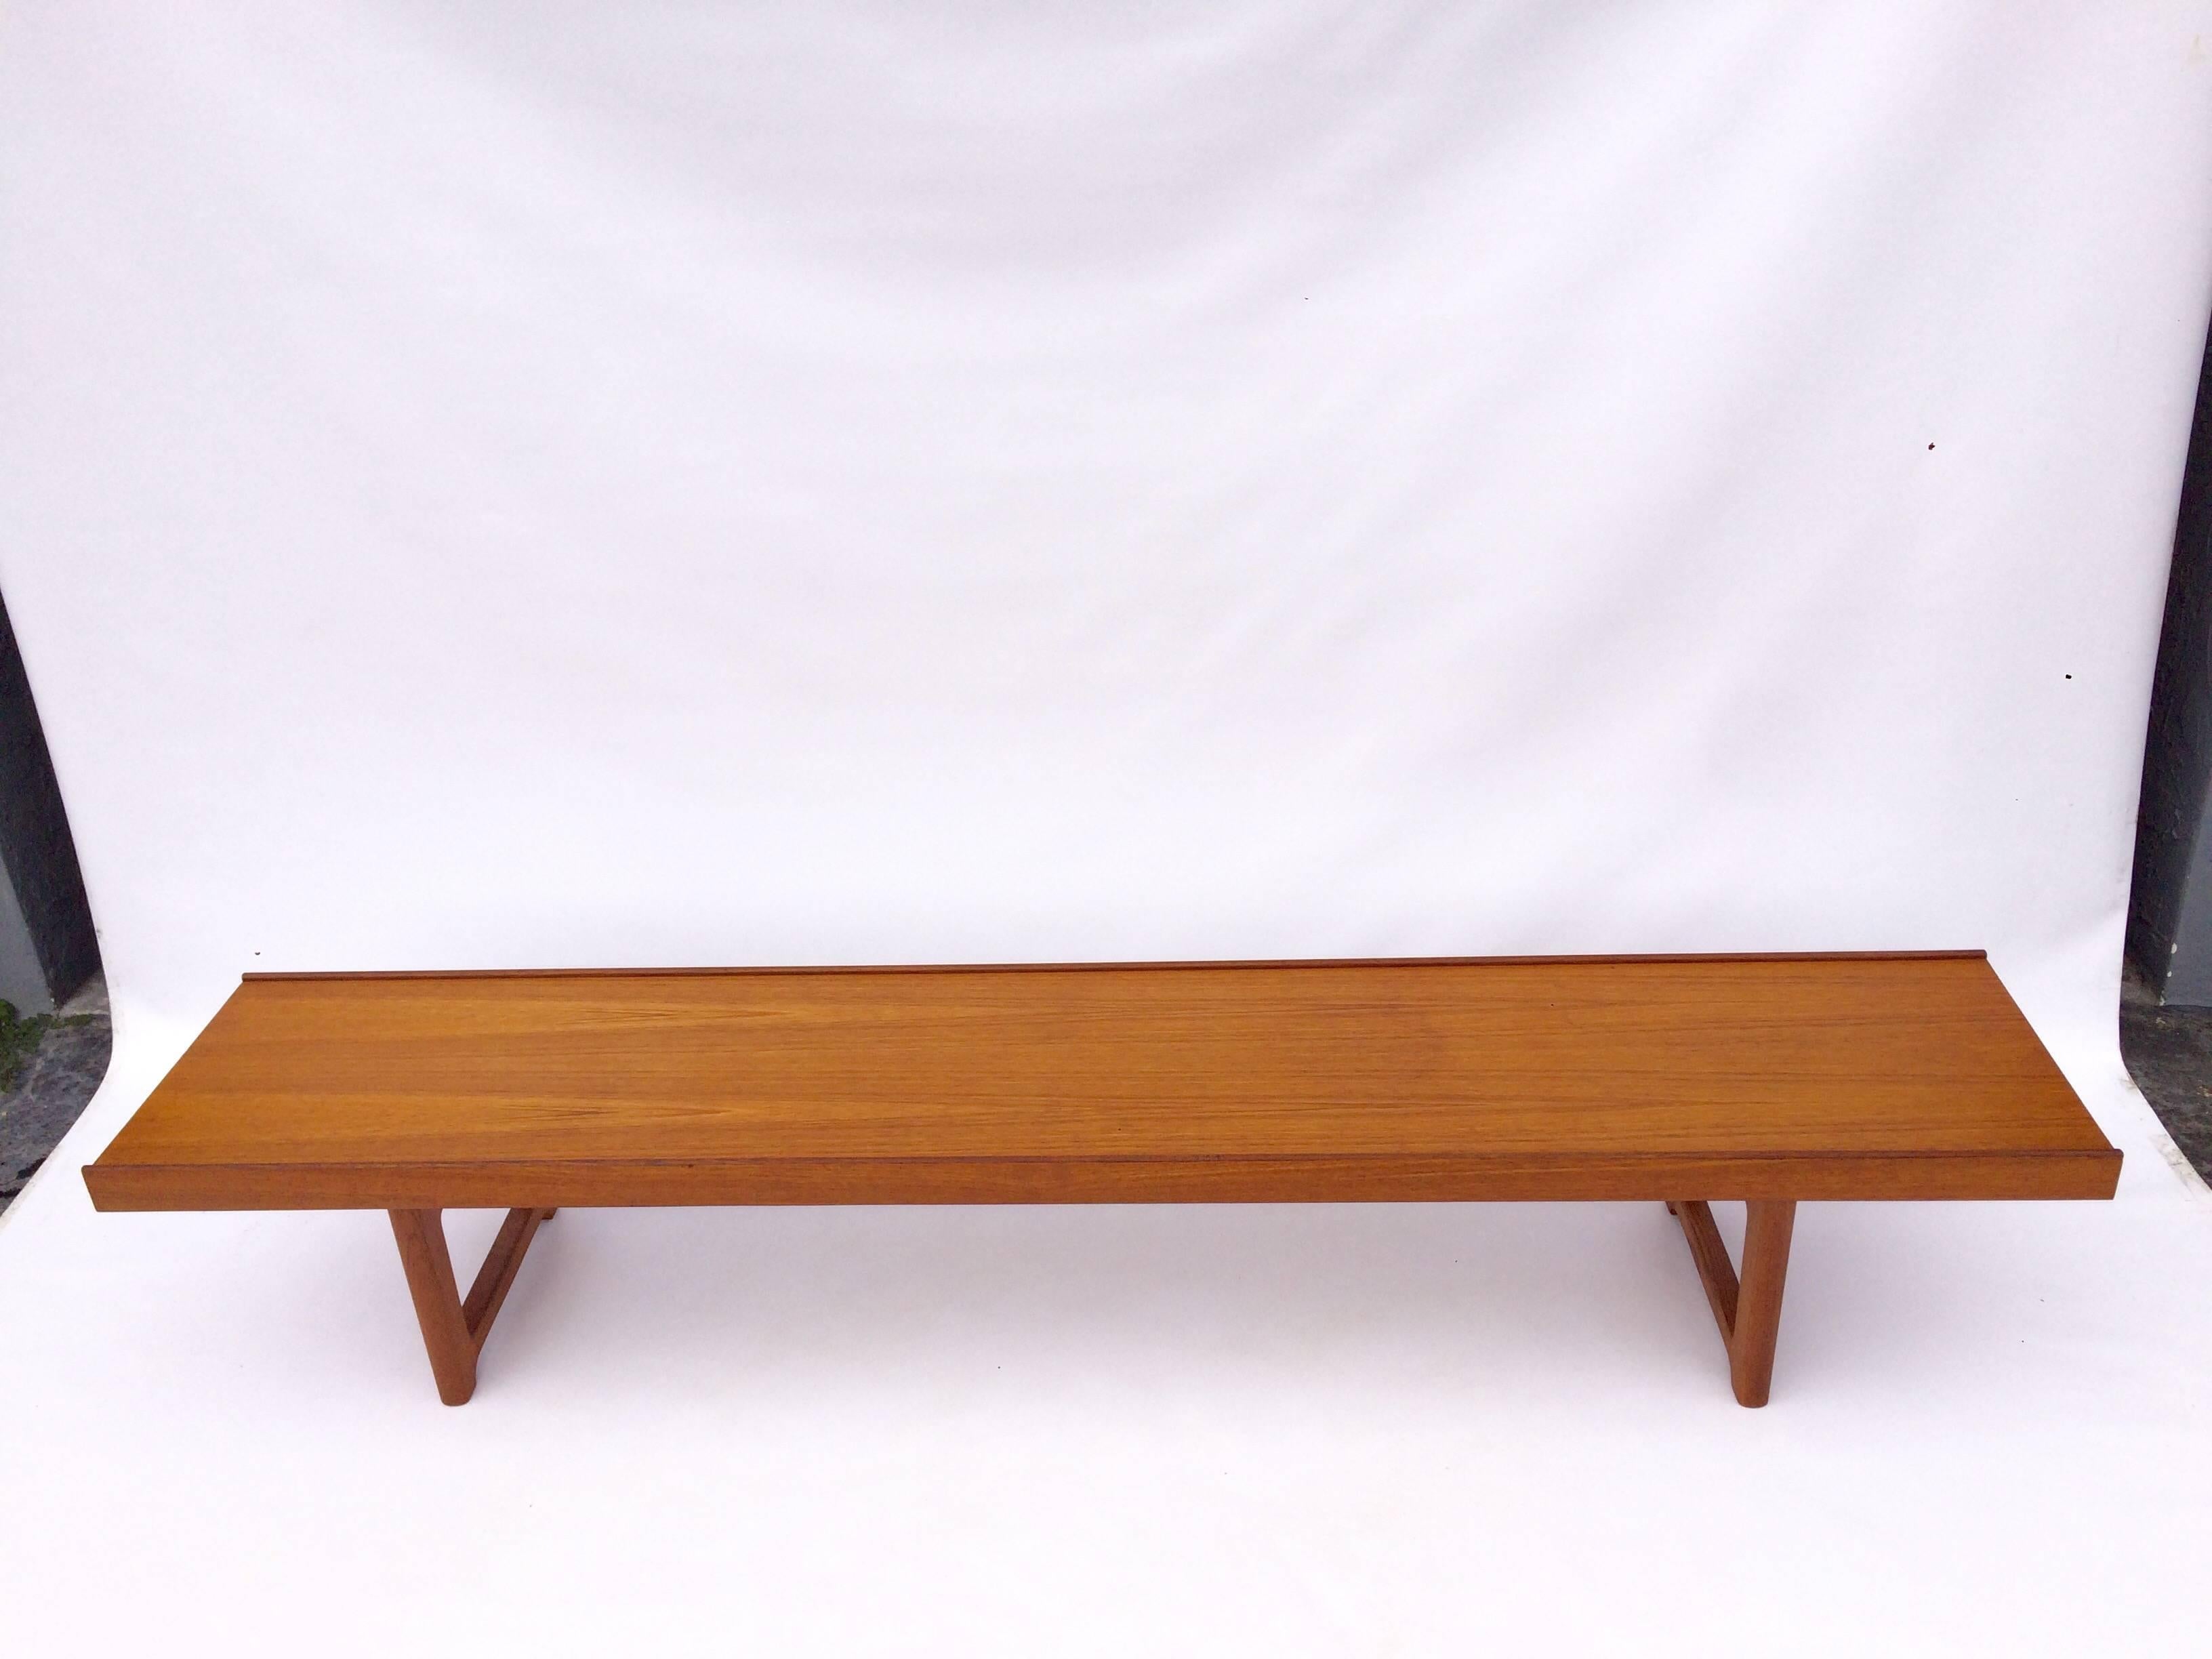 Teak bench with one removable planter. Planter is 23.50